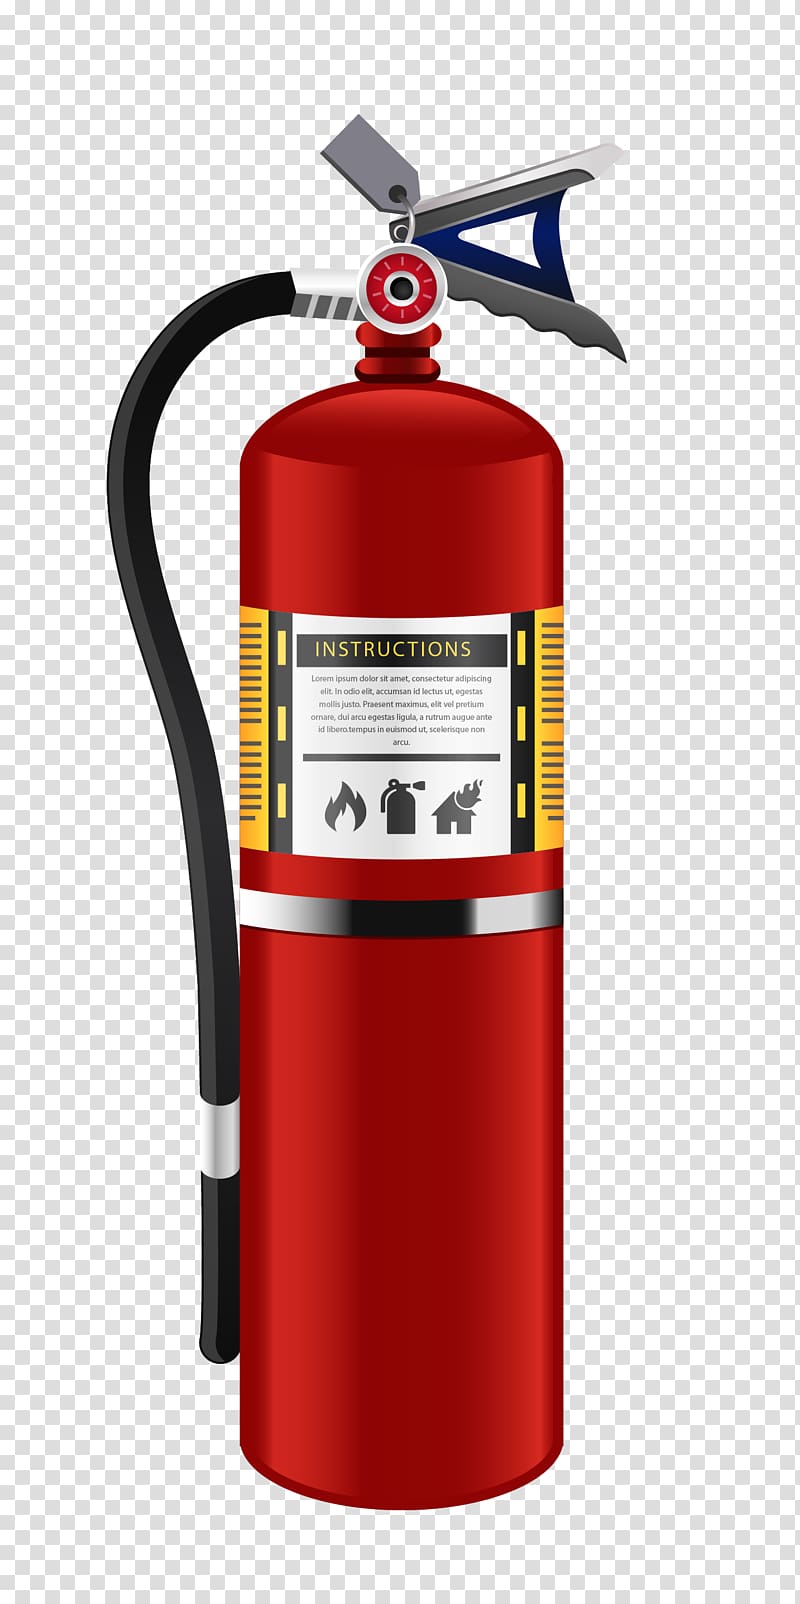 red fire extinguisher illustration, Fire extinguisher Fire class, Fire extinguisher realistic material transparent background PNG clipart